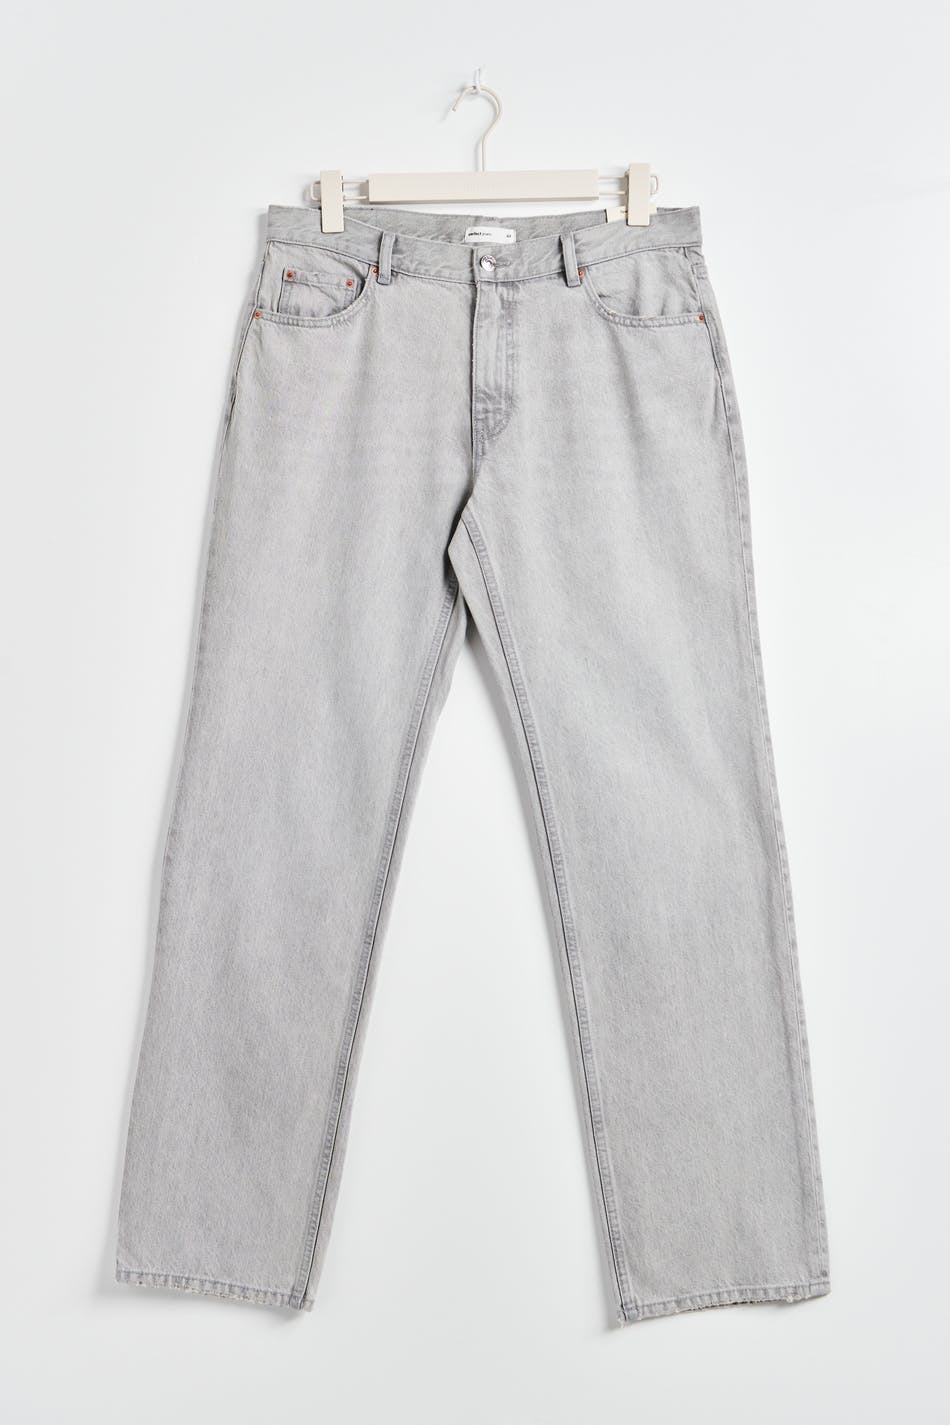 Gina Tricot - Low straight petite jeans - low waist jeans - Grey - 40 - Female